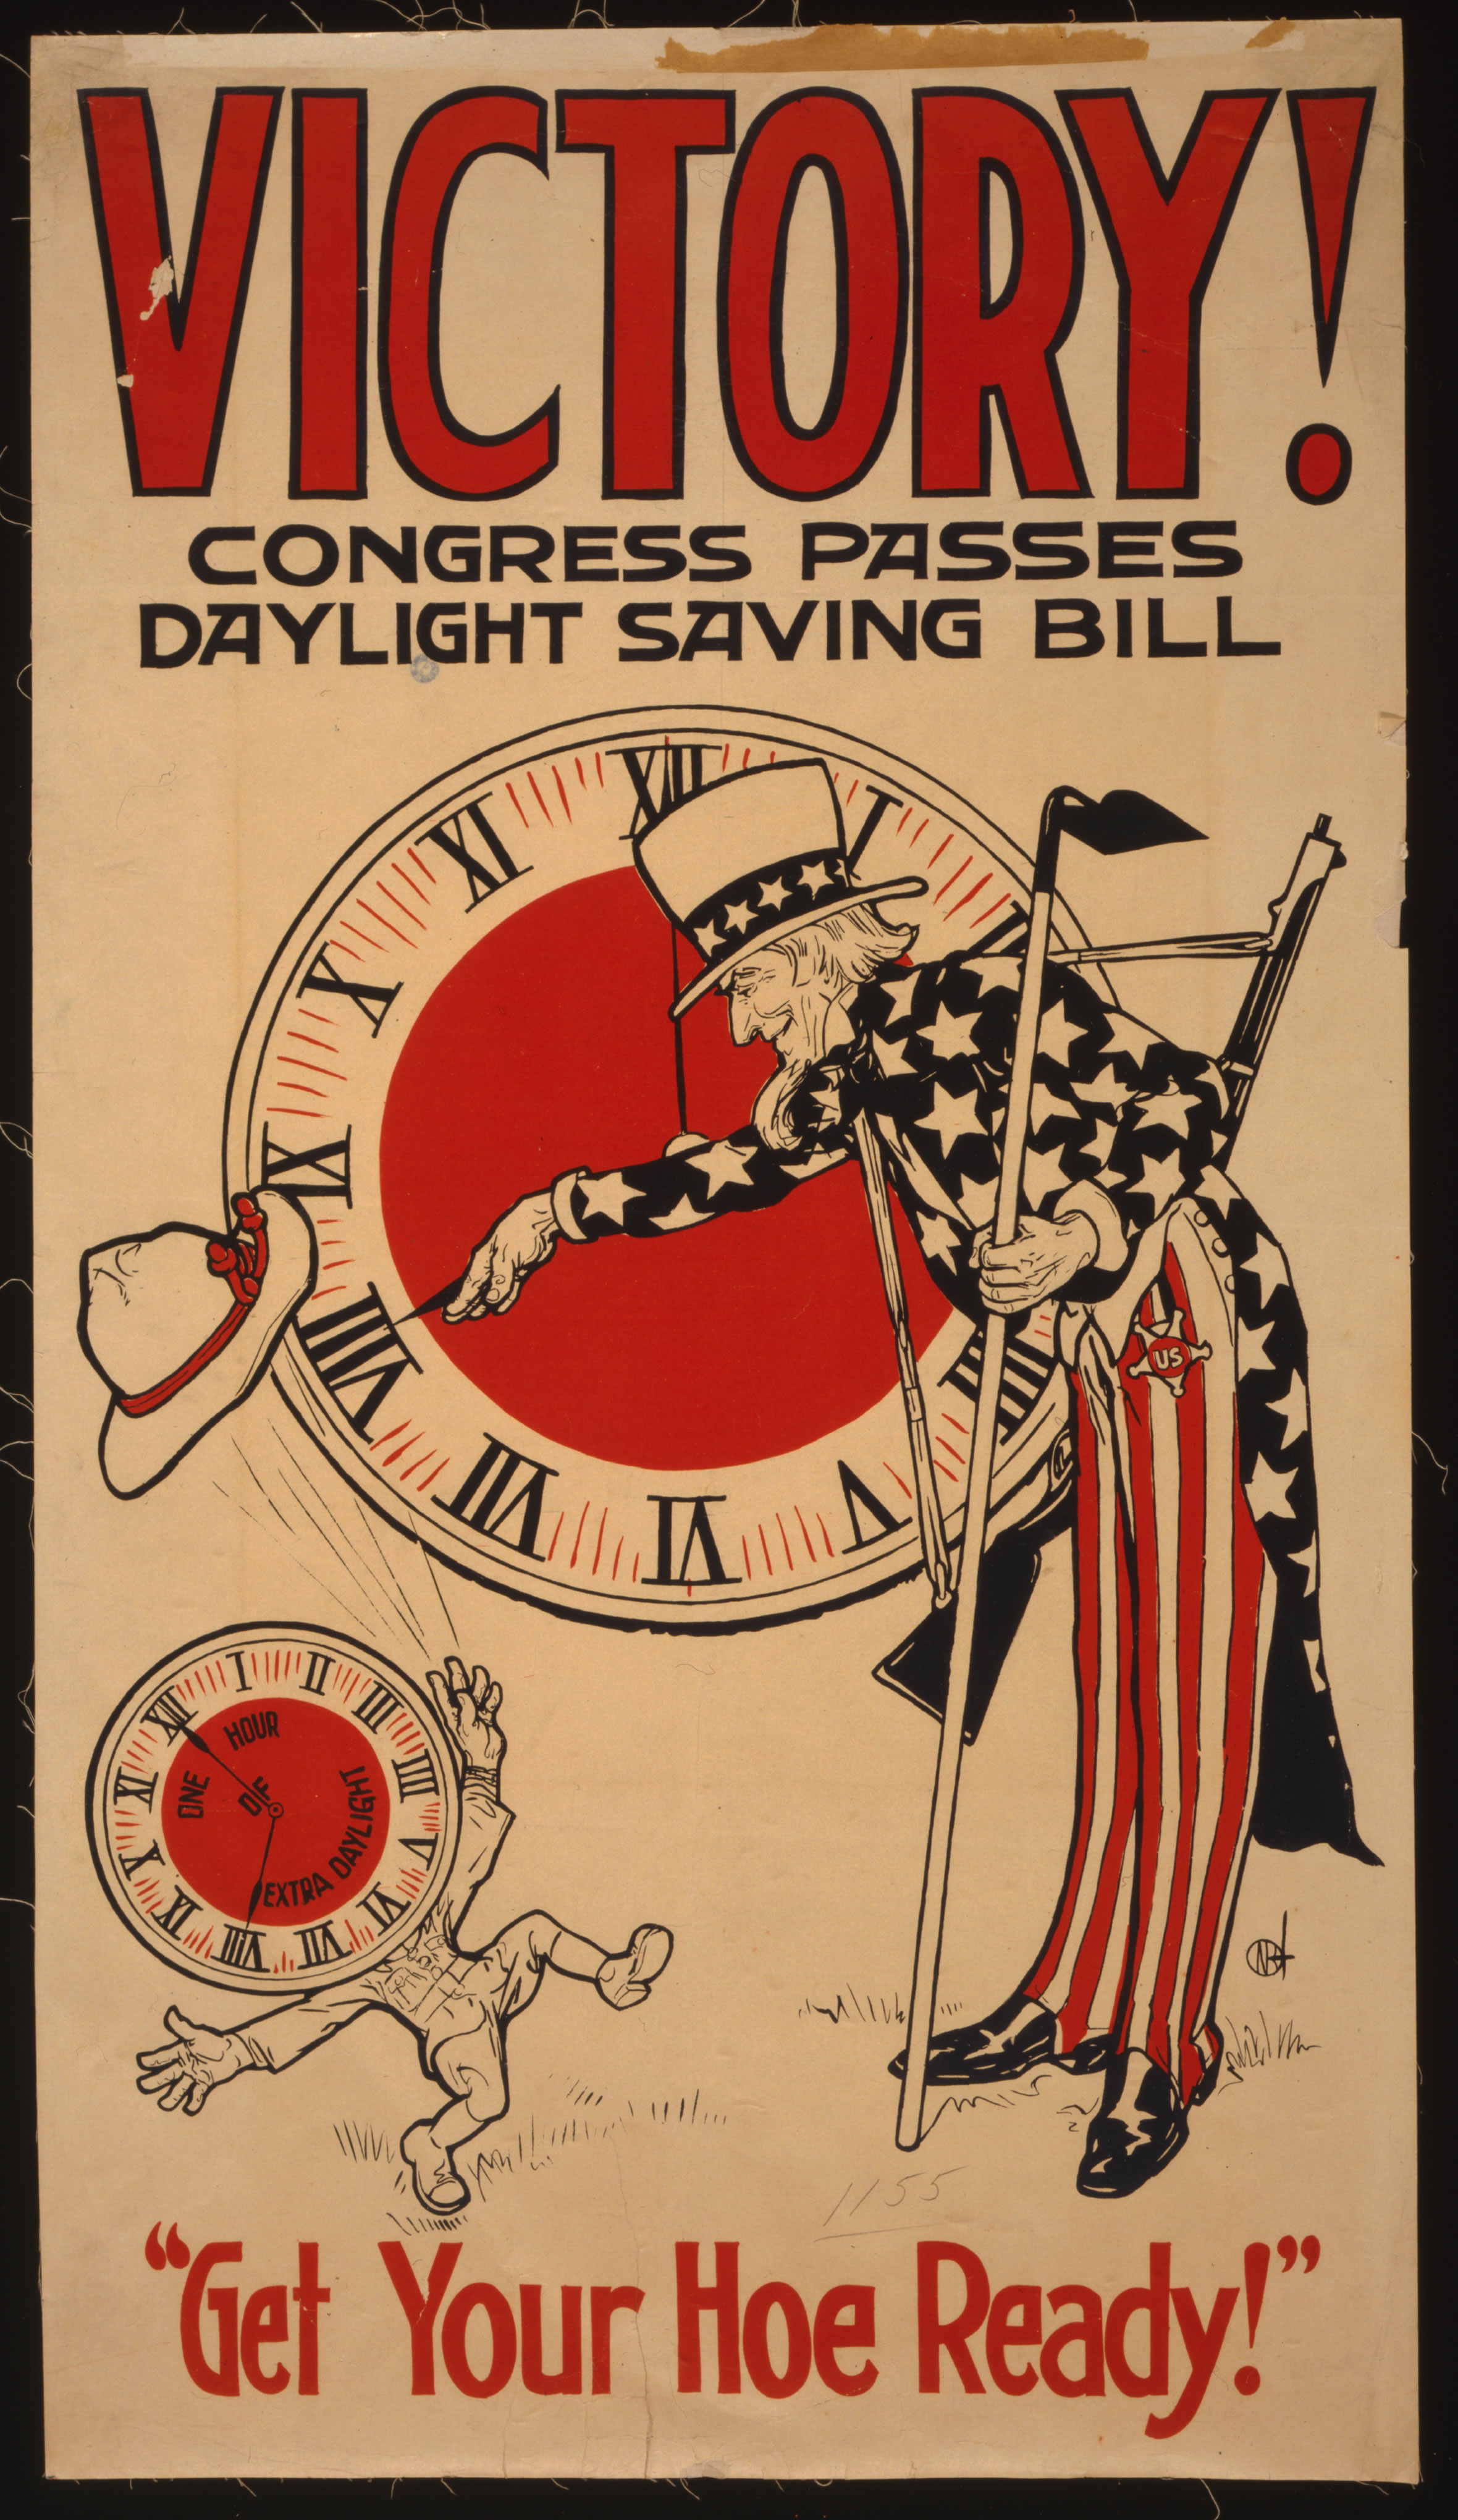 Broadside cheering the passage of the Daylight Saving Time Act in 1918